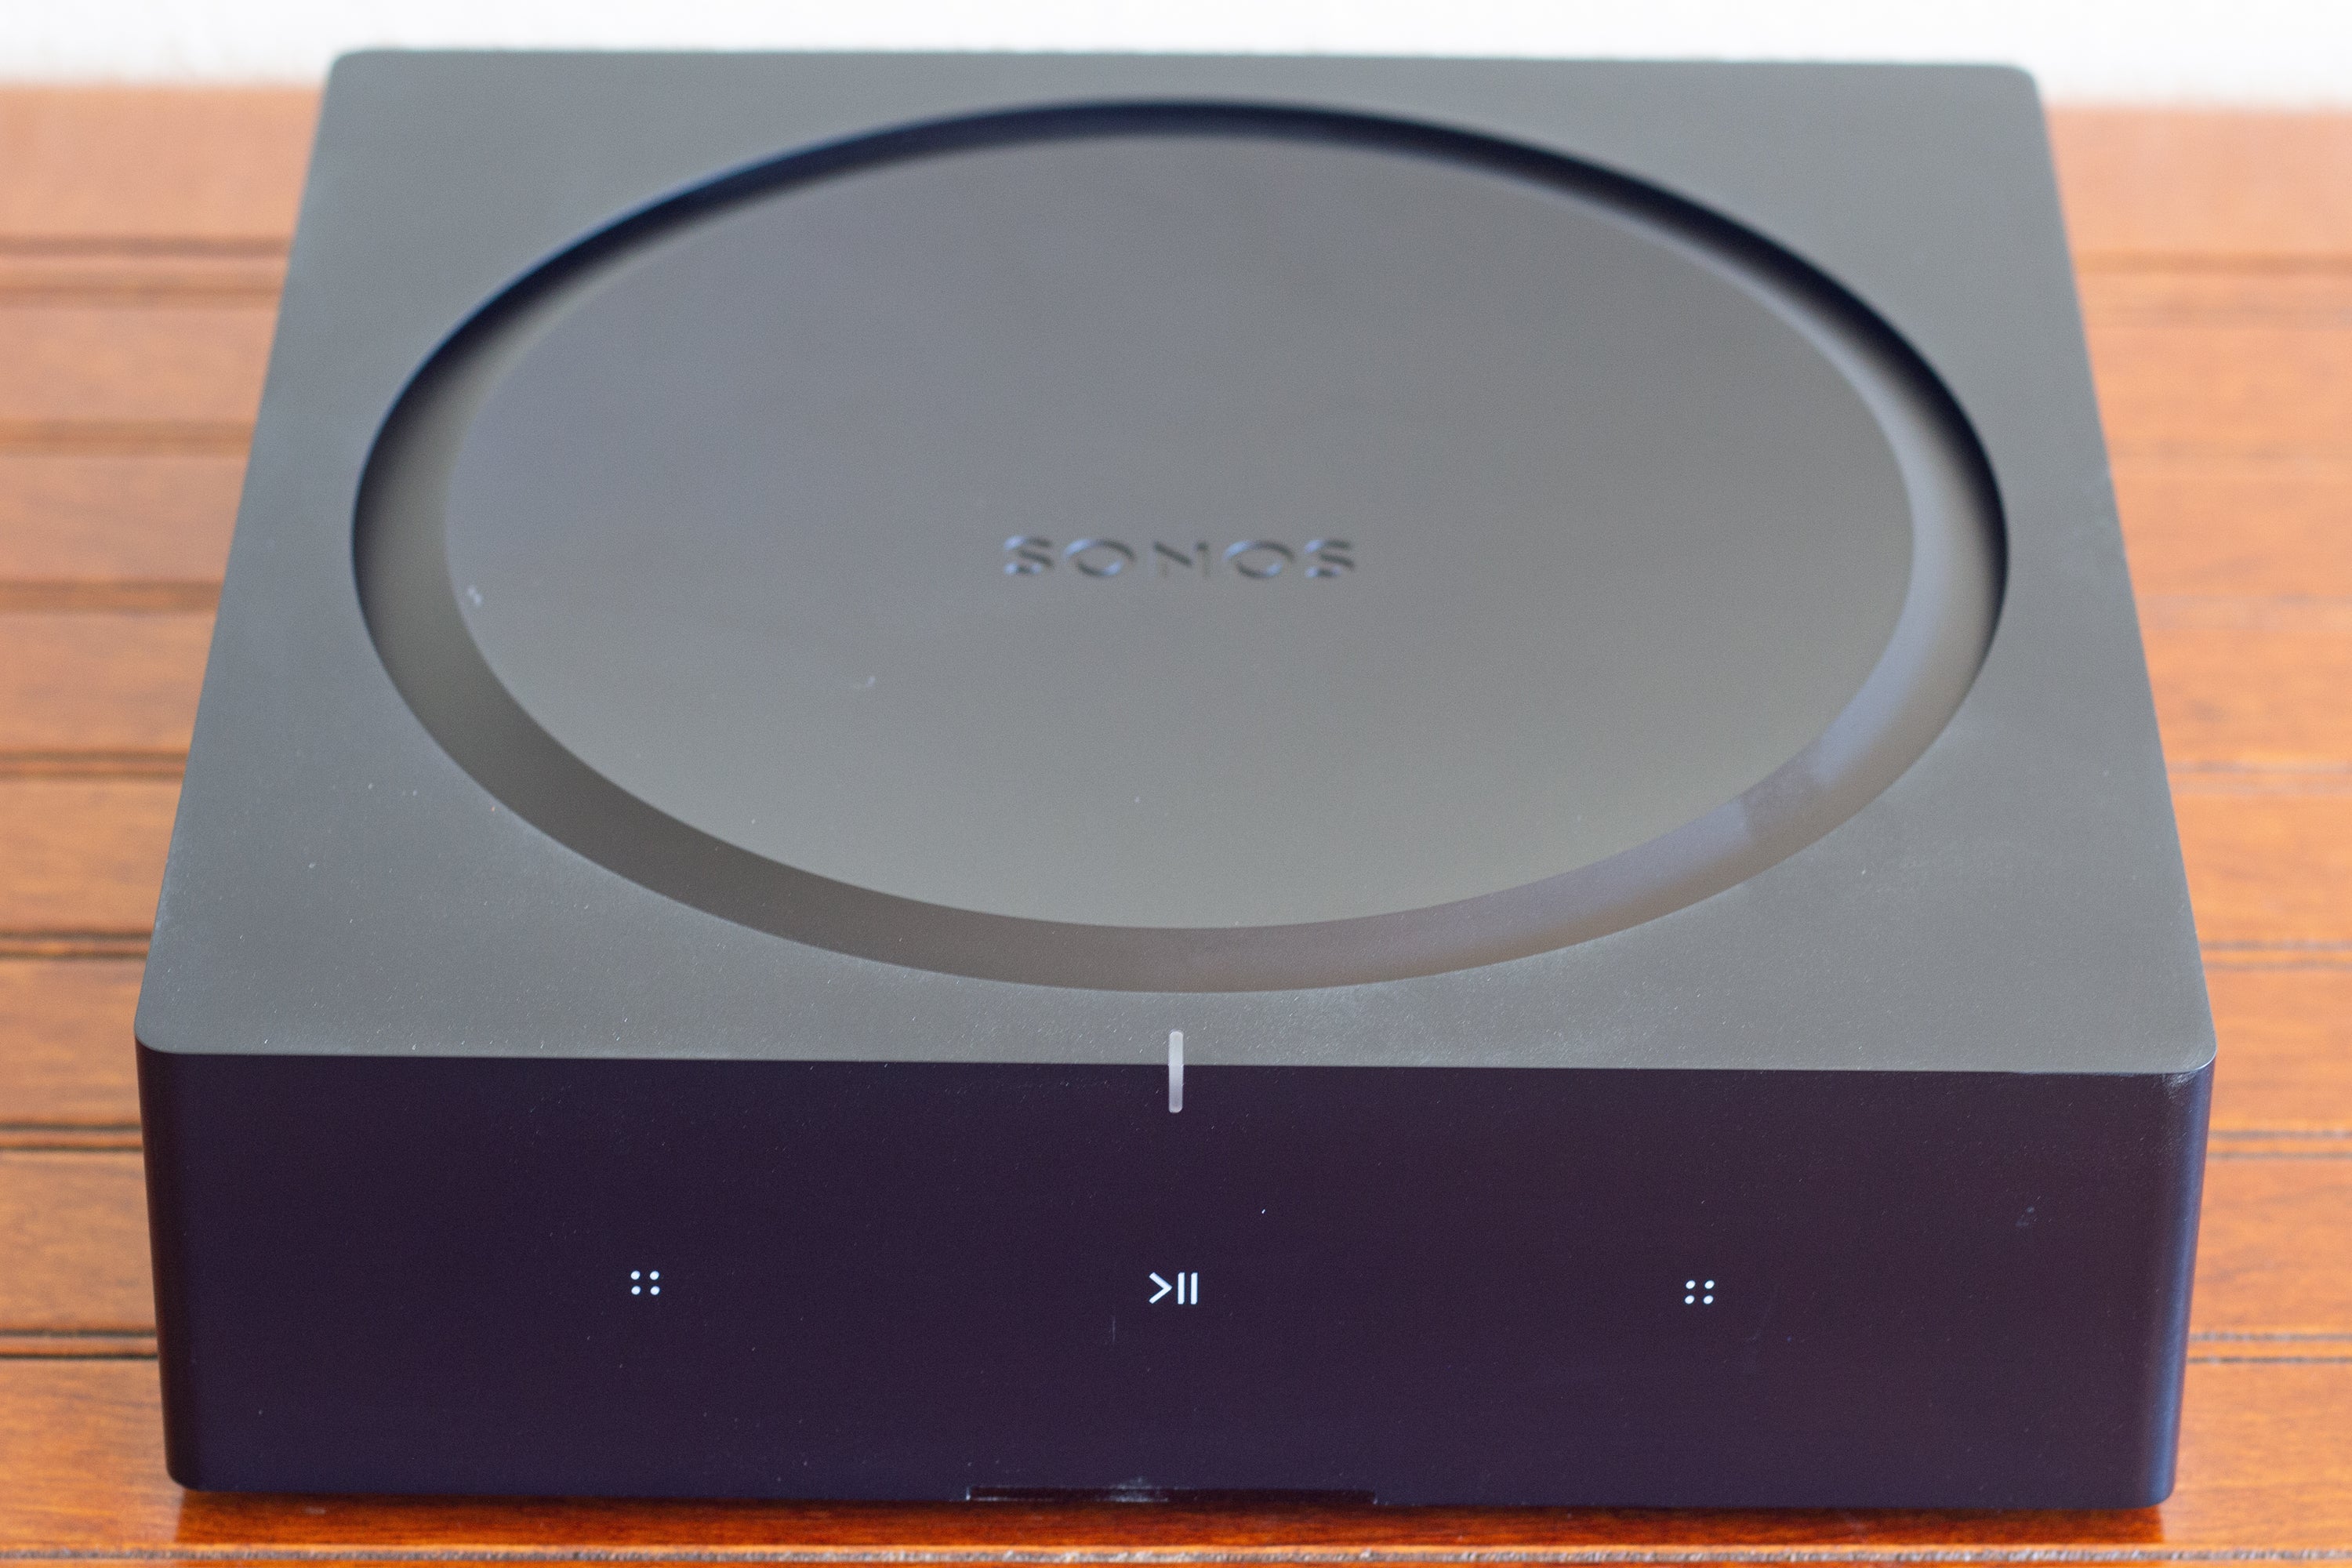 Sonos Amp Review This Is The Best Sonos Music Streamer By Far